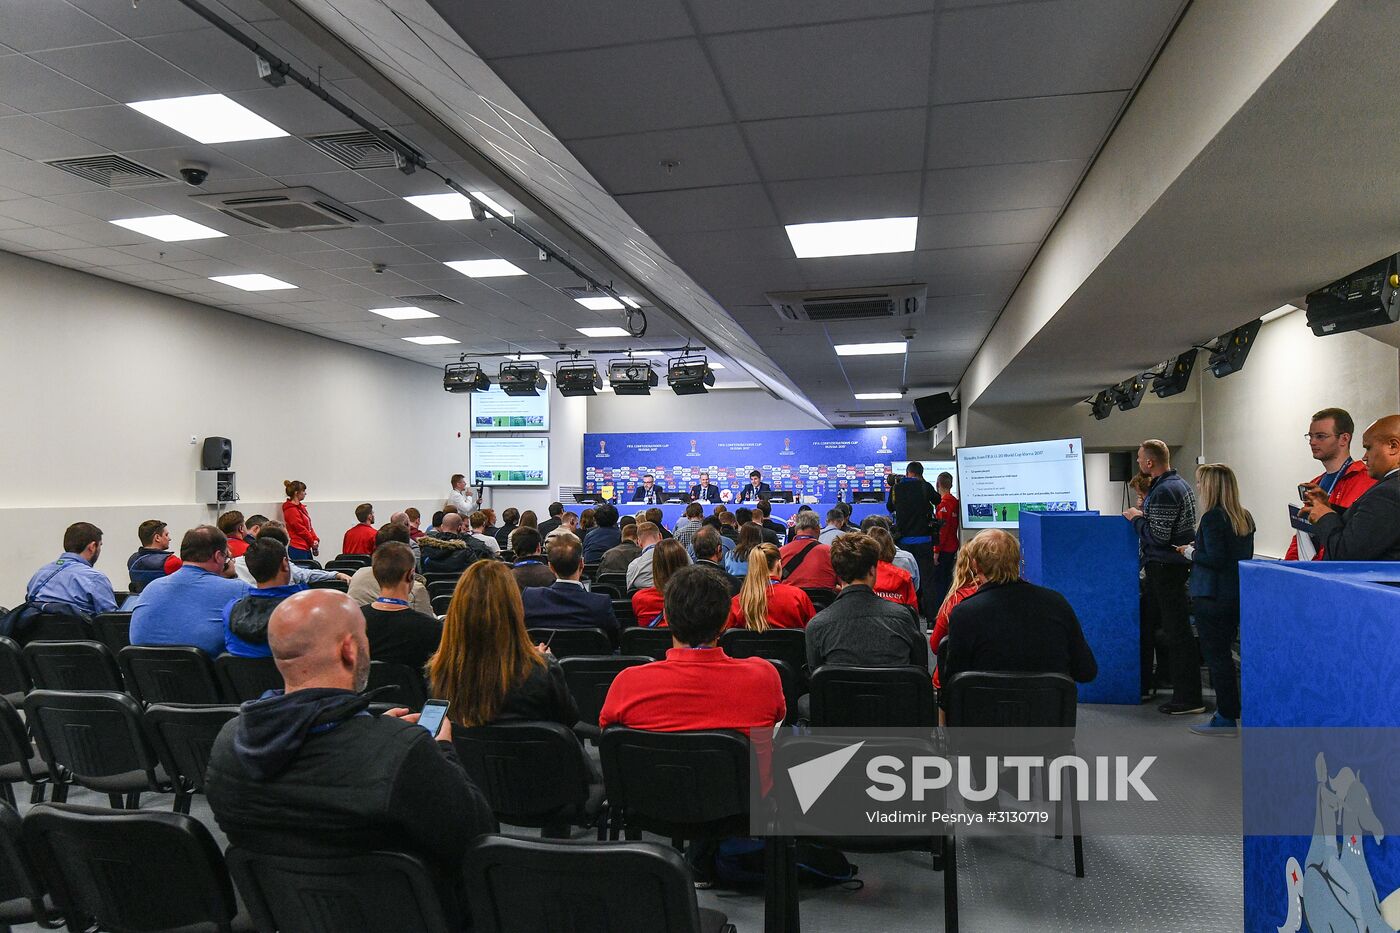 Football. 2017 Confederations Cup. News conference on Goal Decision System